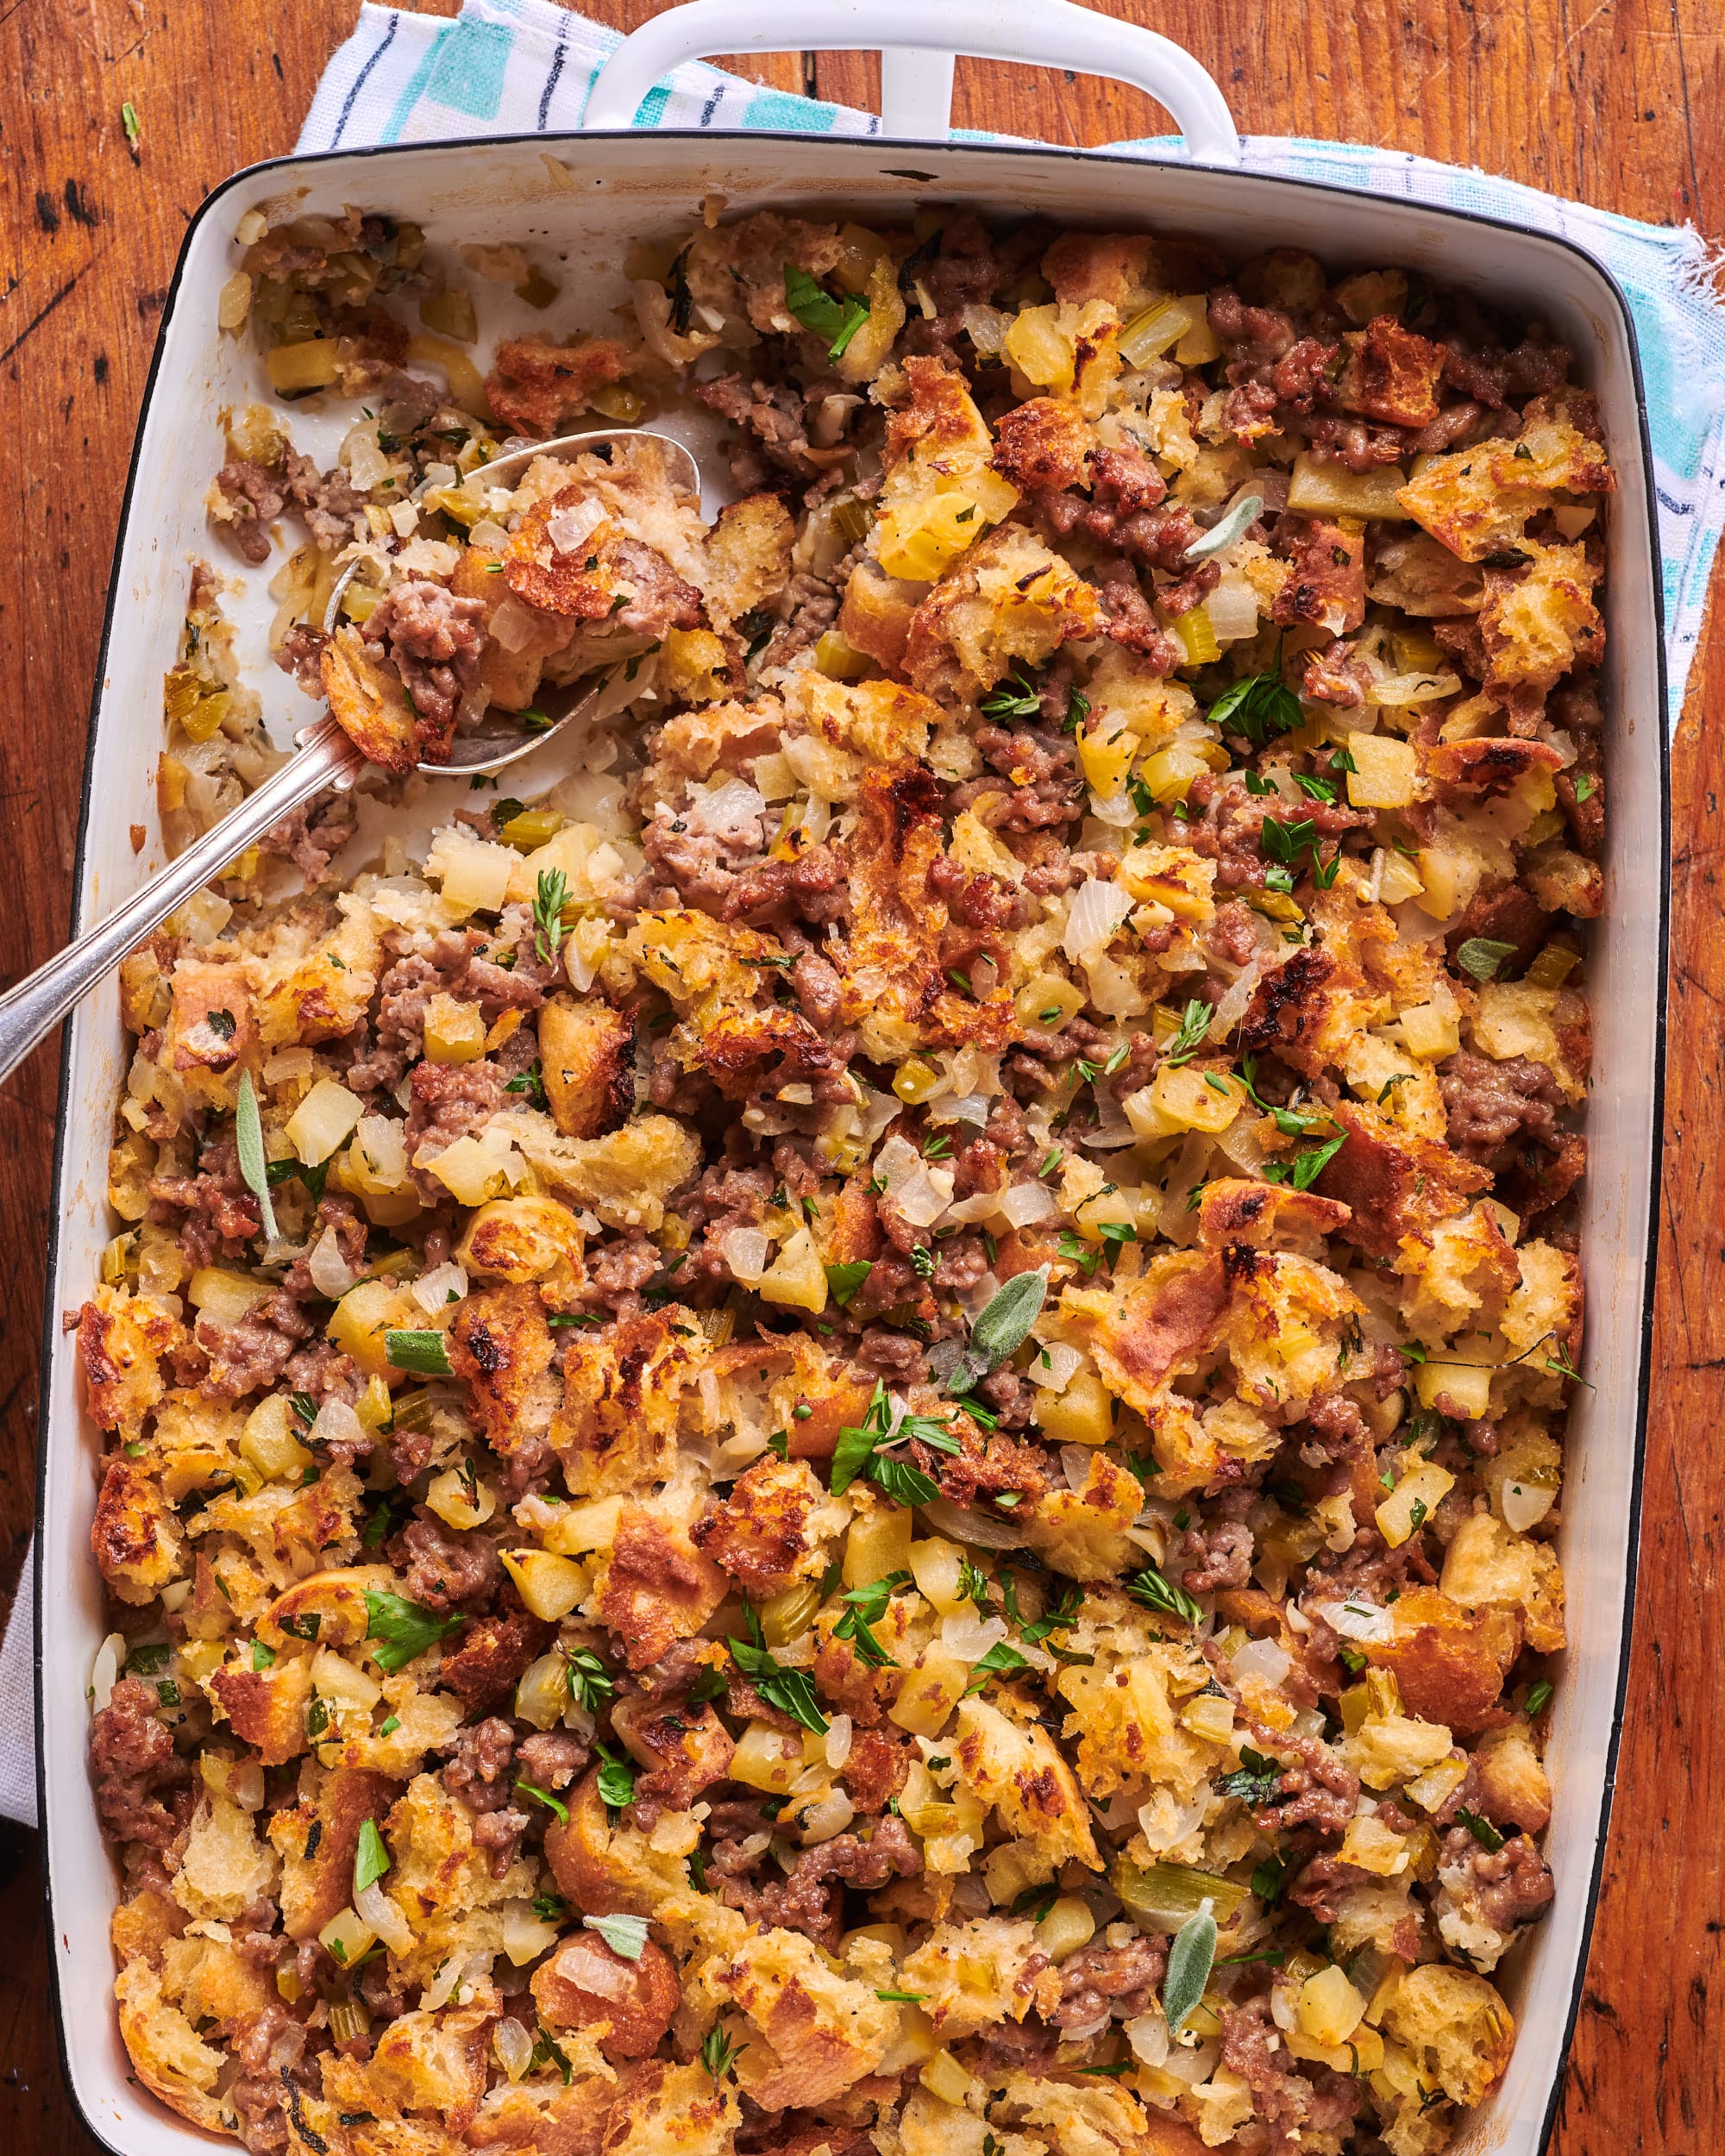 How To Make Sausage & Herb Stuffing: The Easiest Recipe | Kitchn